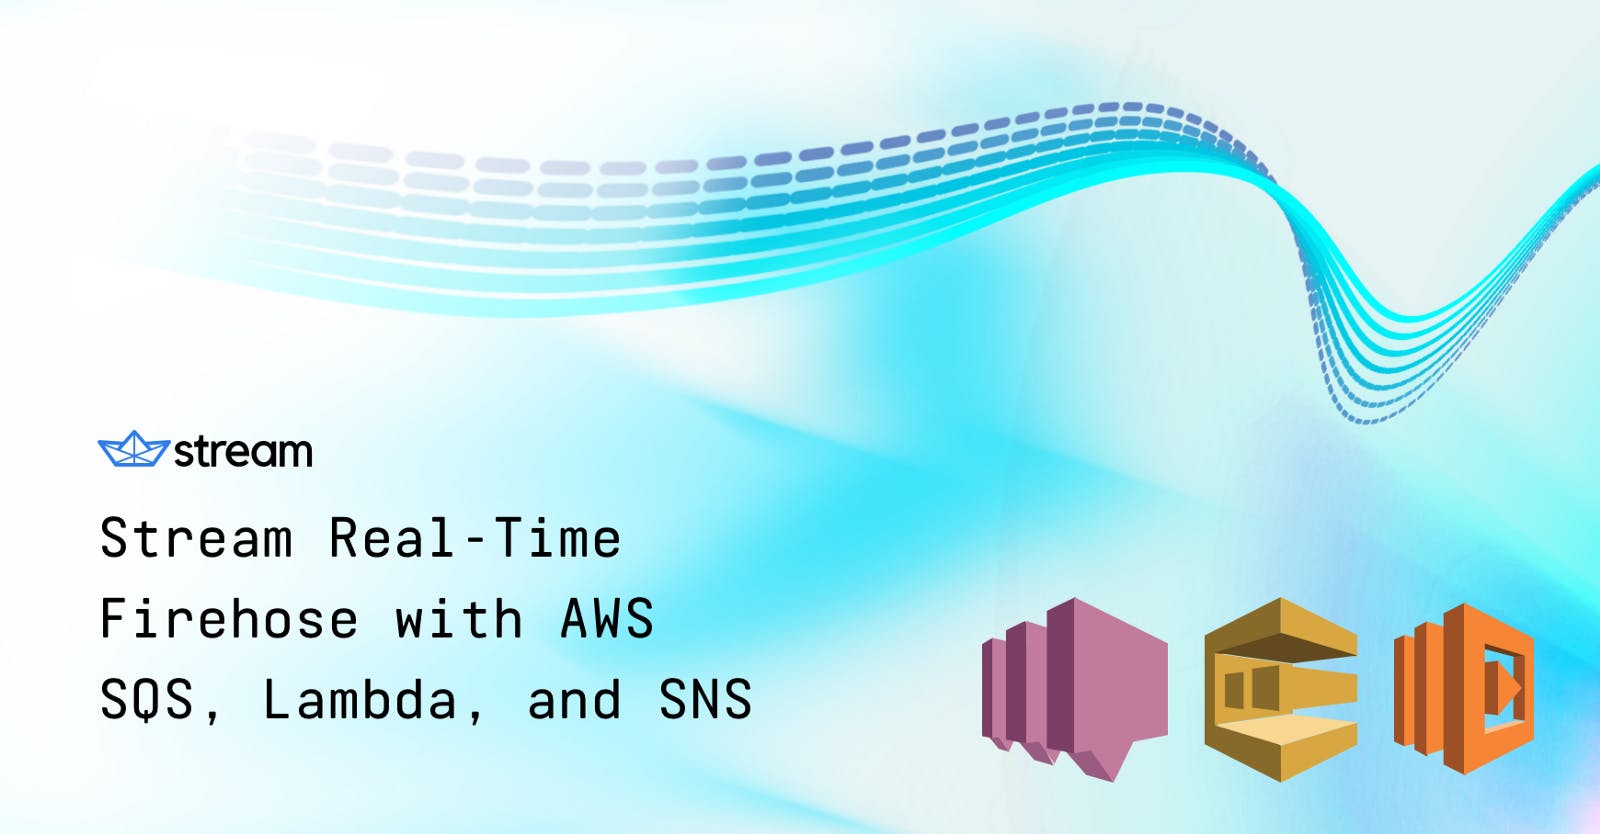 /using-the-stream-real-time-firehose-with-aws-sqs-lambda-and-sns-25bbefef198a feature image